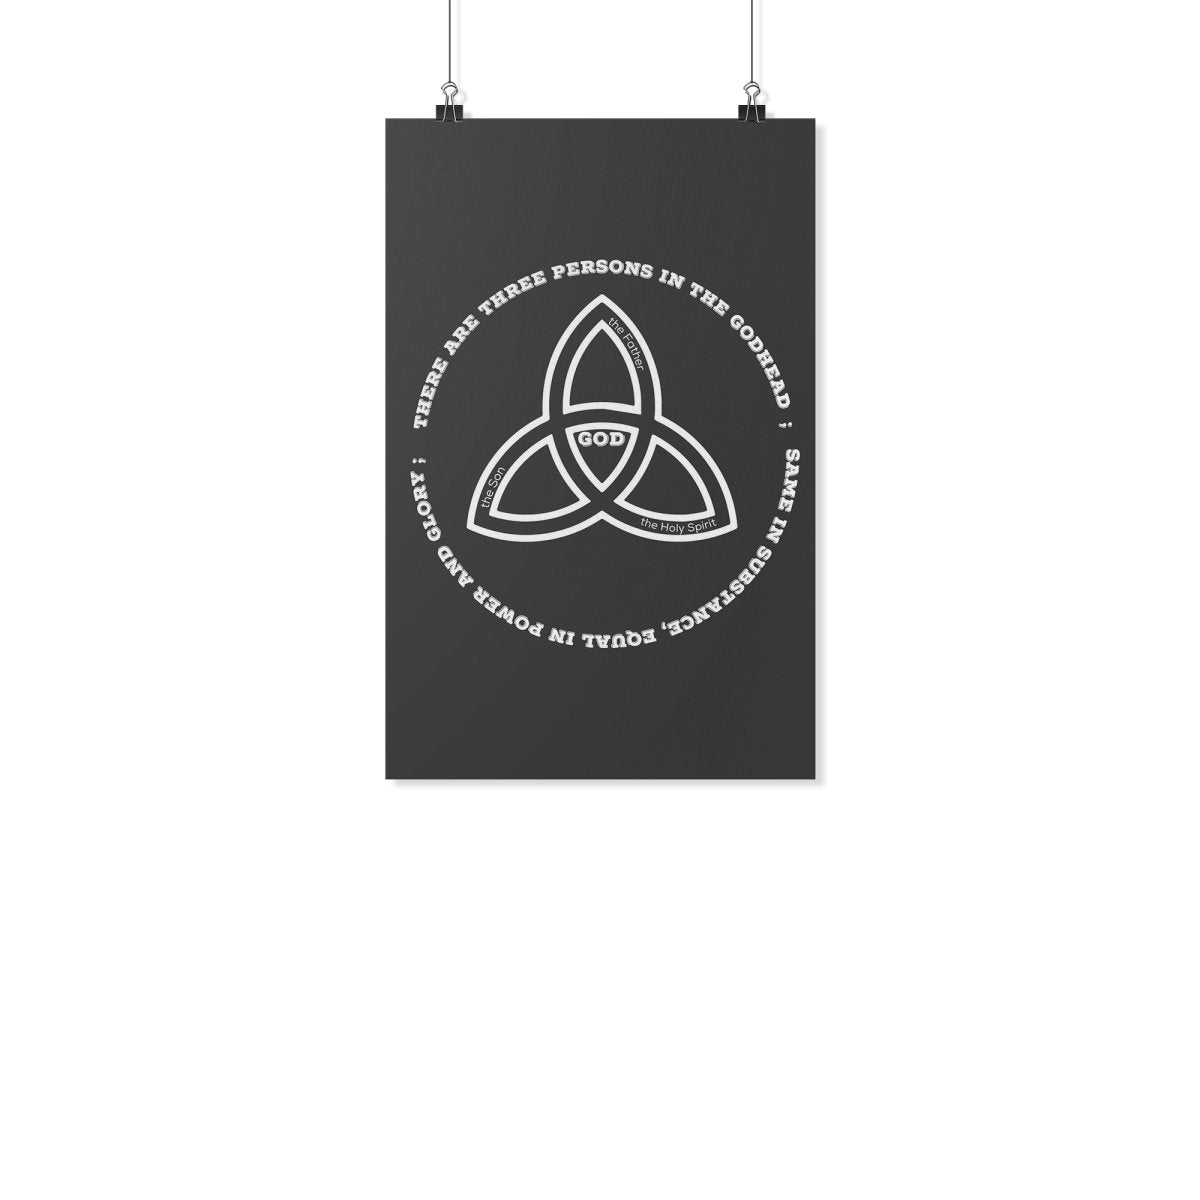 Trinity Round (Wall Poster) - SDG Clothing